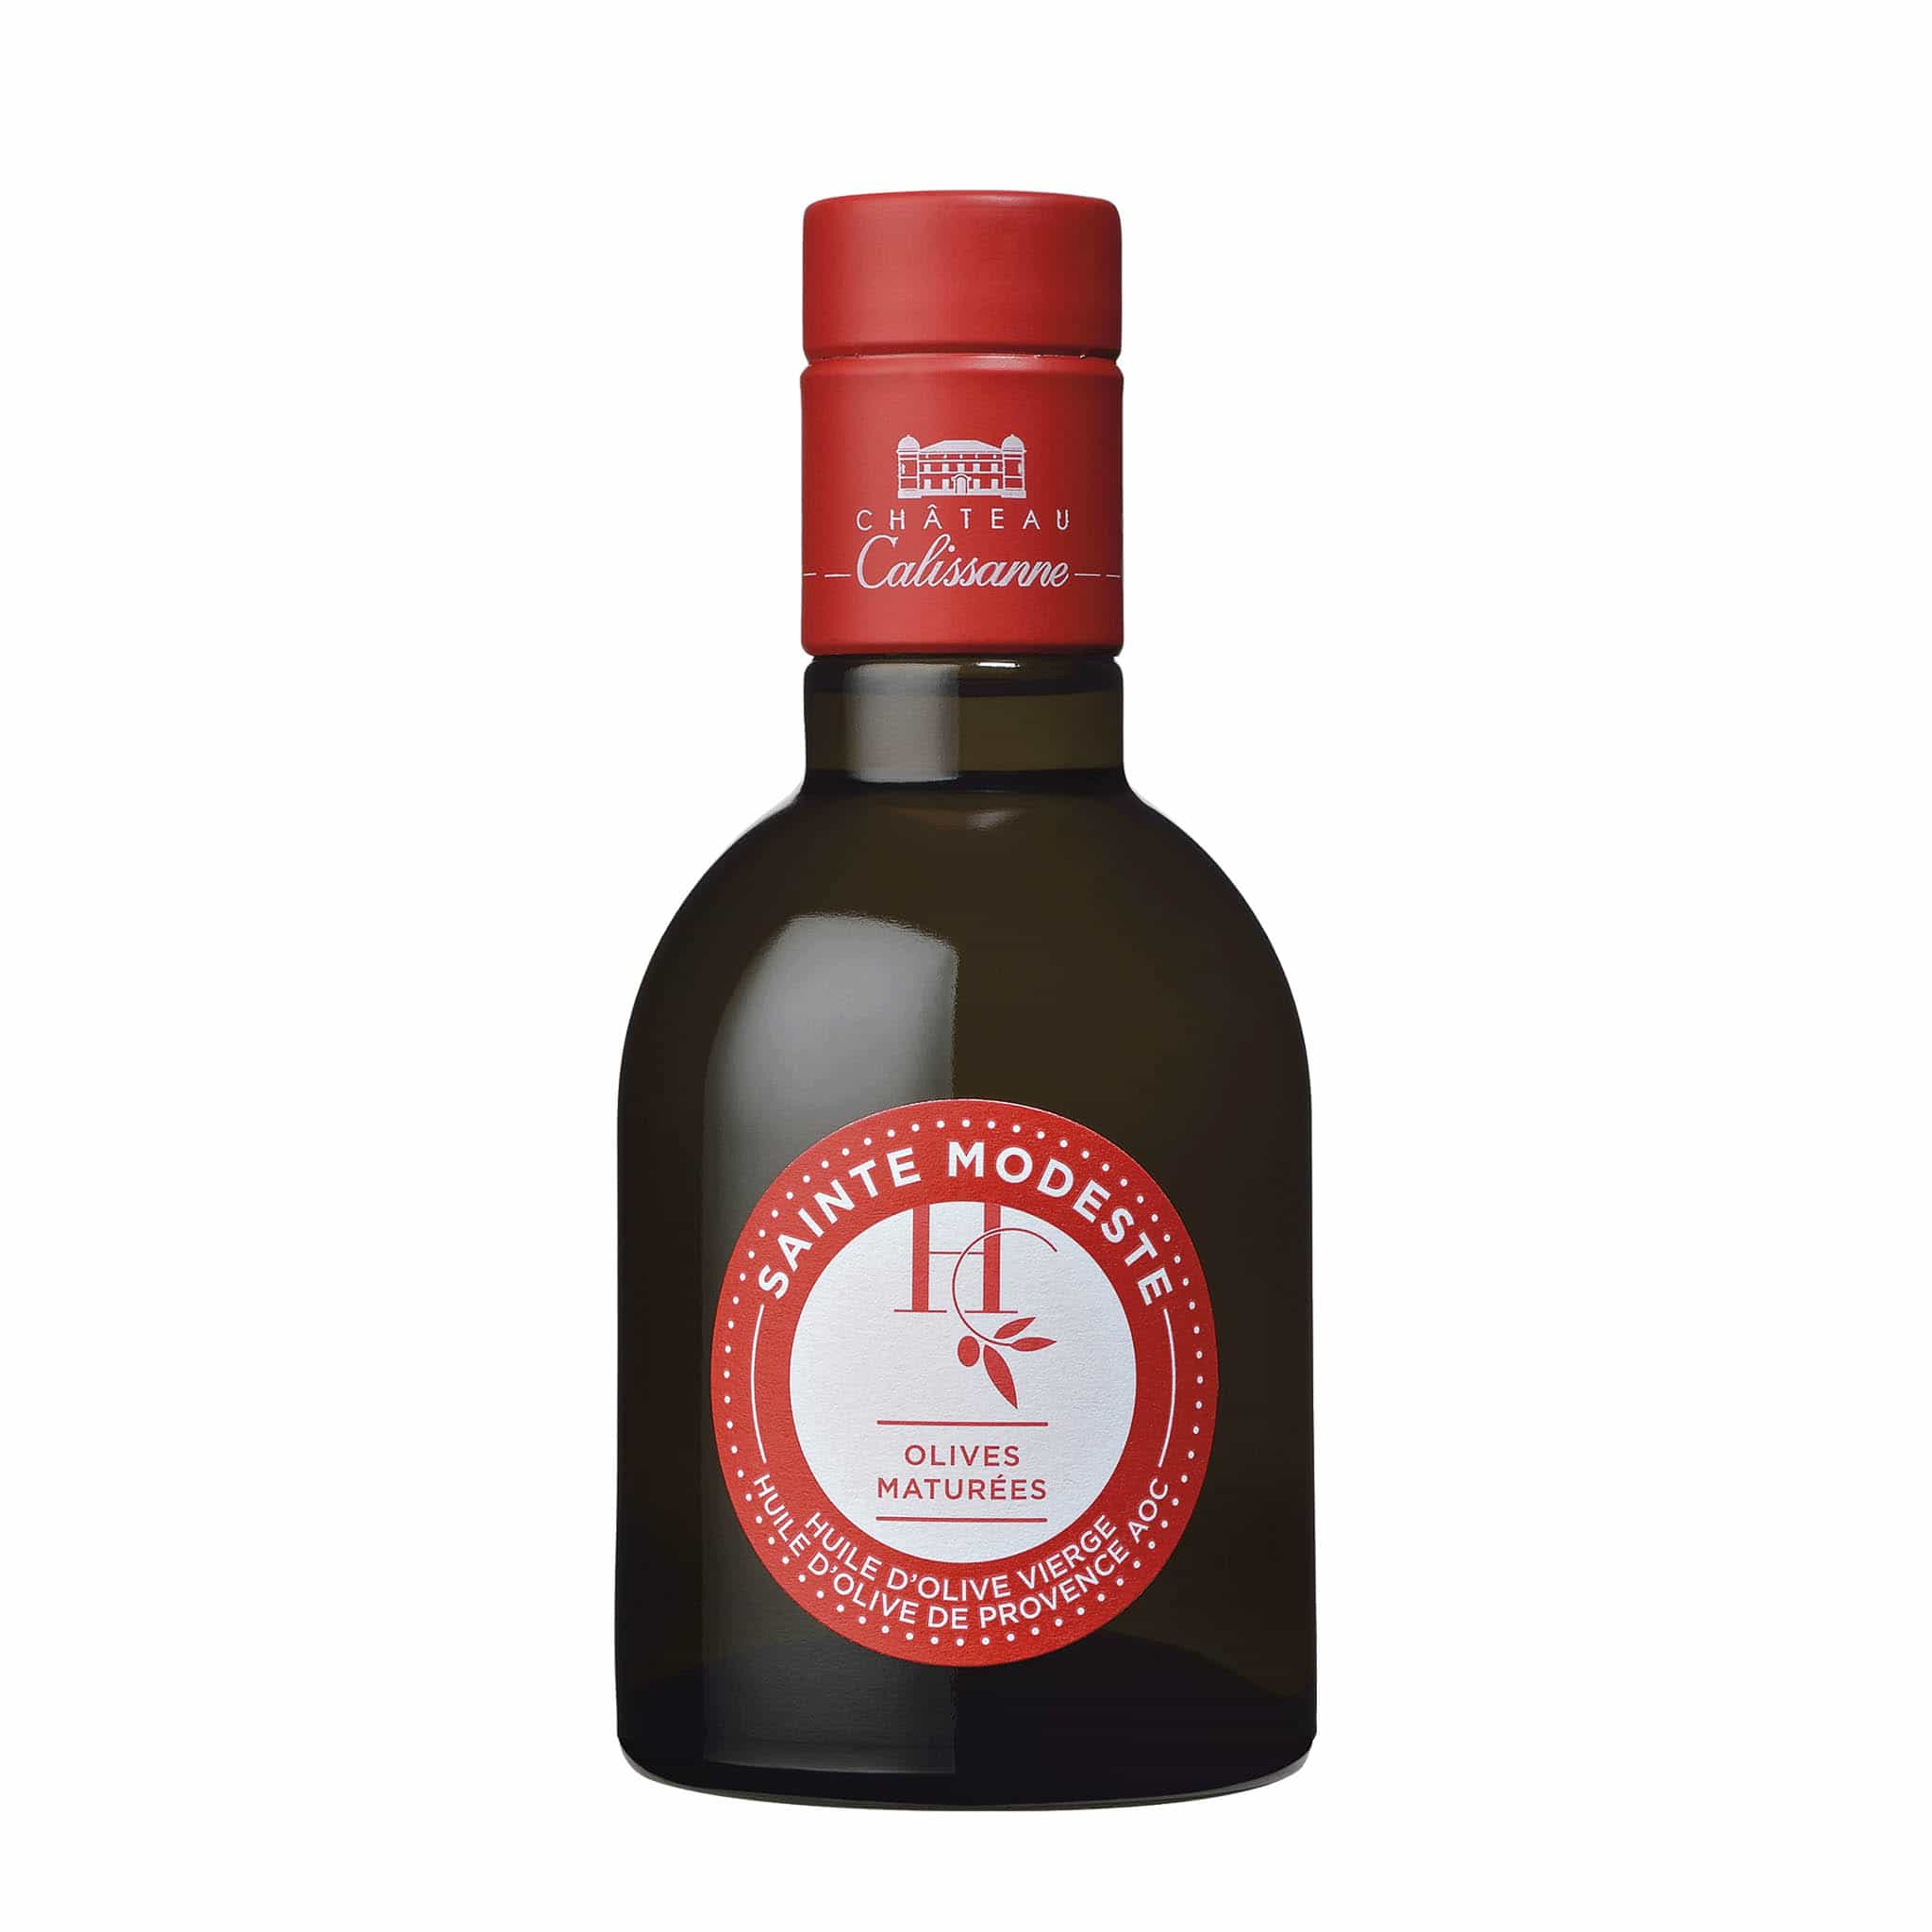 Chateau Calissanne Provence Mature Virgin Olive Oil, 250ml